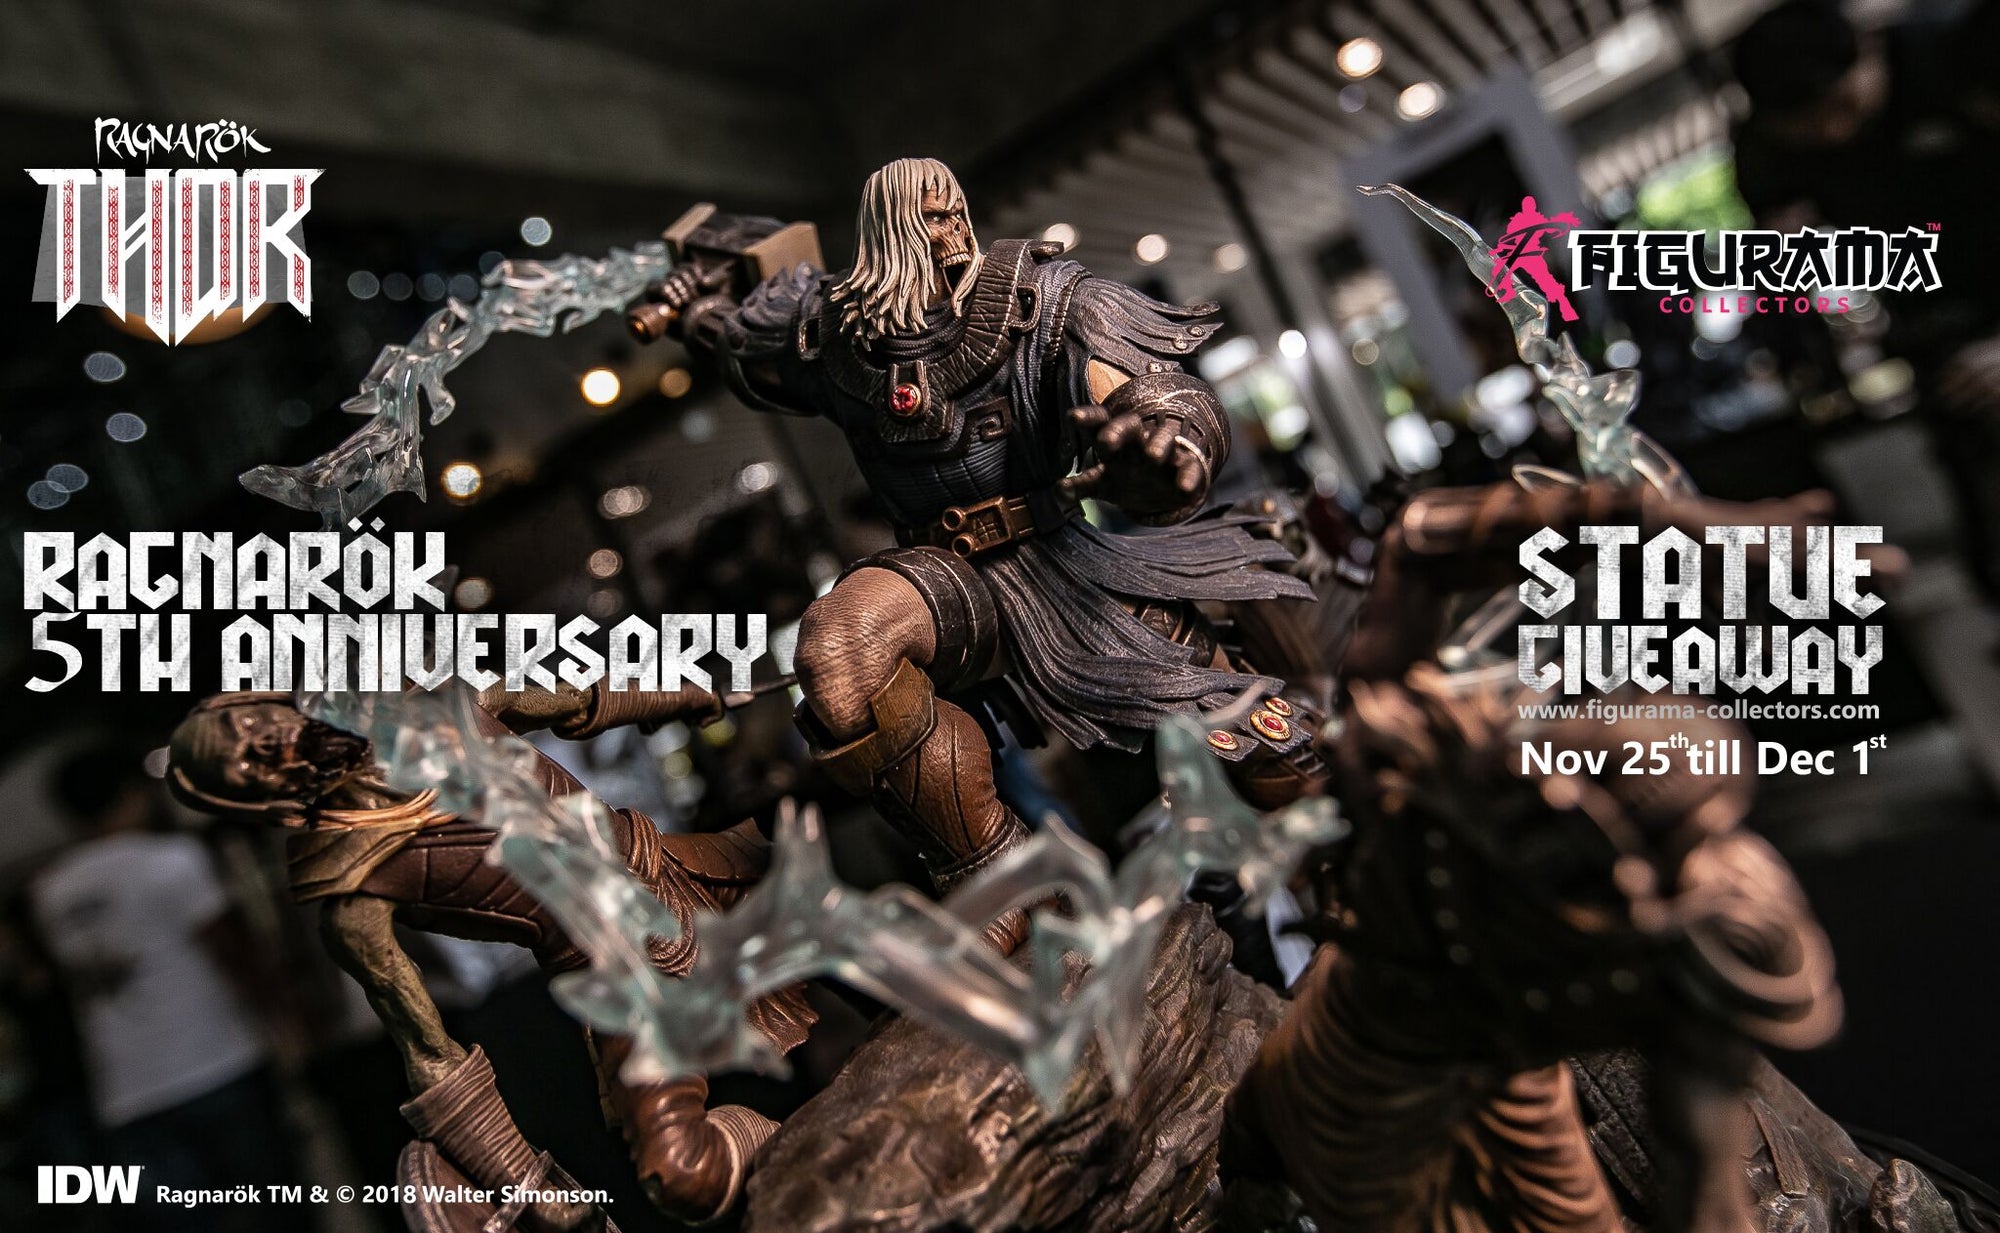 FIGURAMA COLLECTORS CELEBRATES 5 YEARS OF THOR: RAGNAROK WITH A STATUE GIVEAWAY!